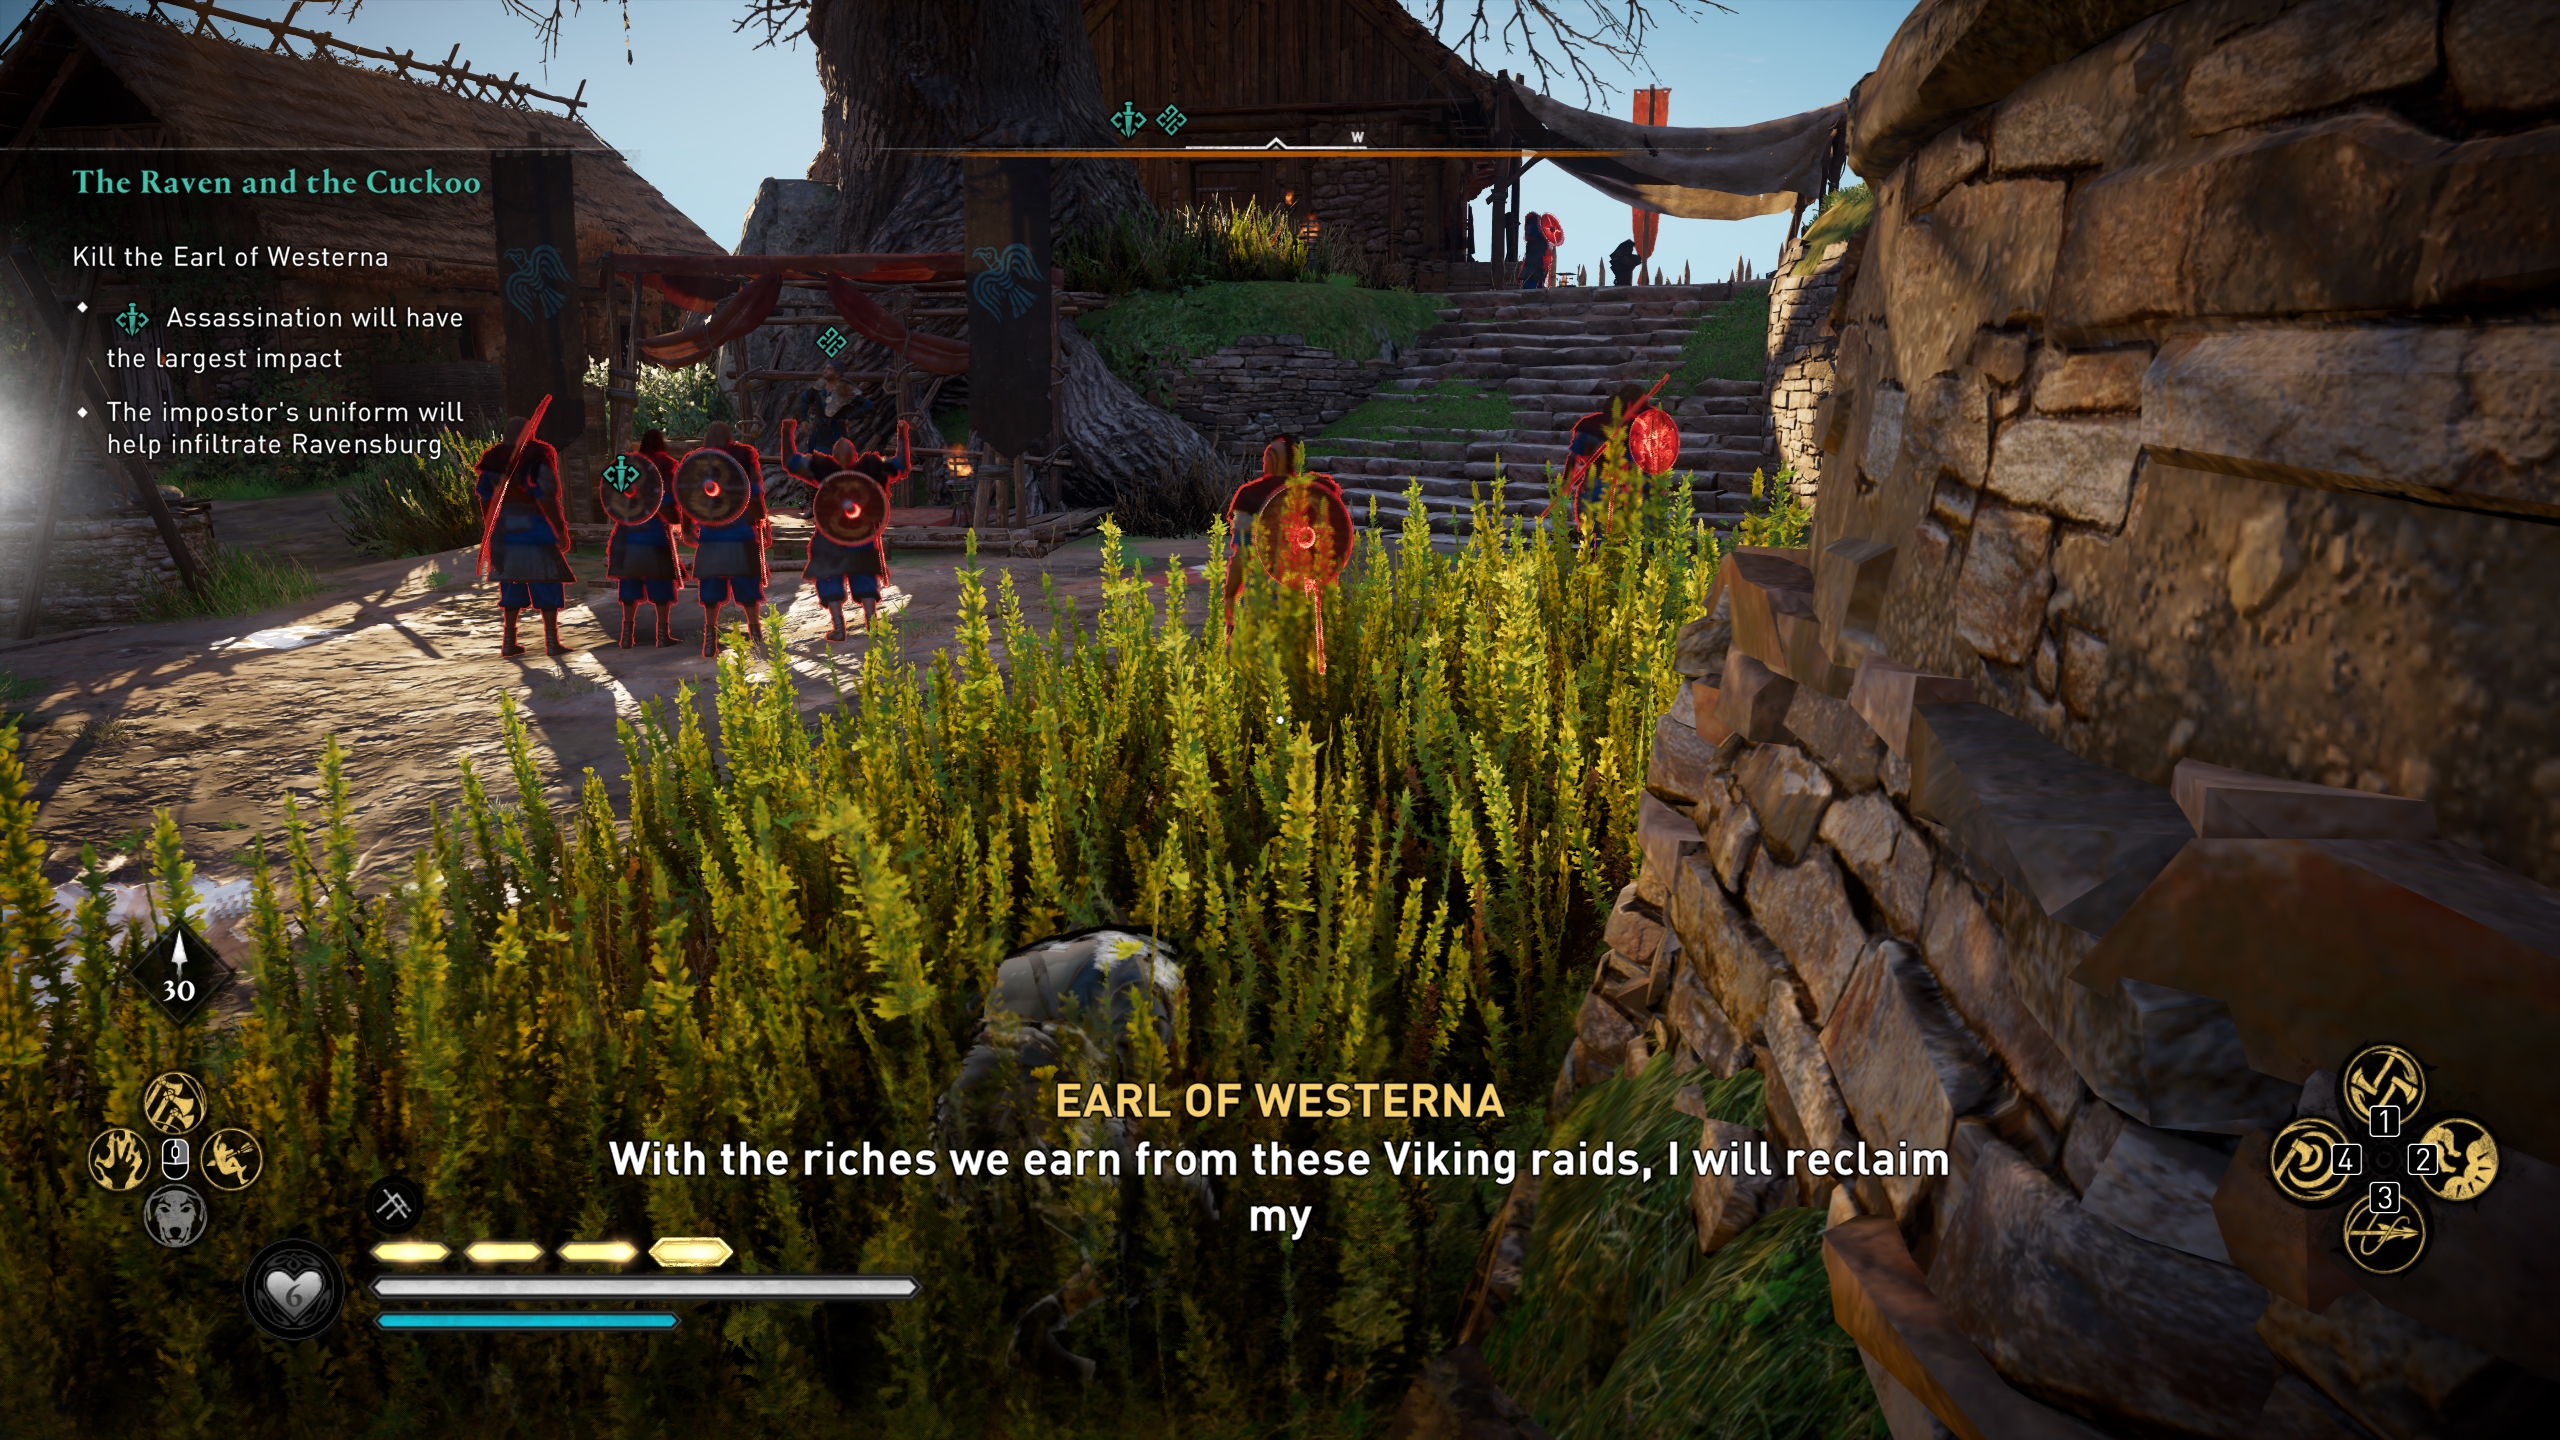 You can assassinate the Earl of Westerna from the shadows, or fight him head on.